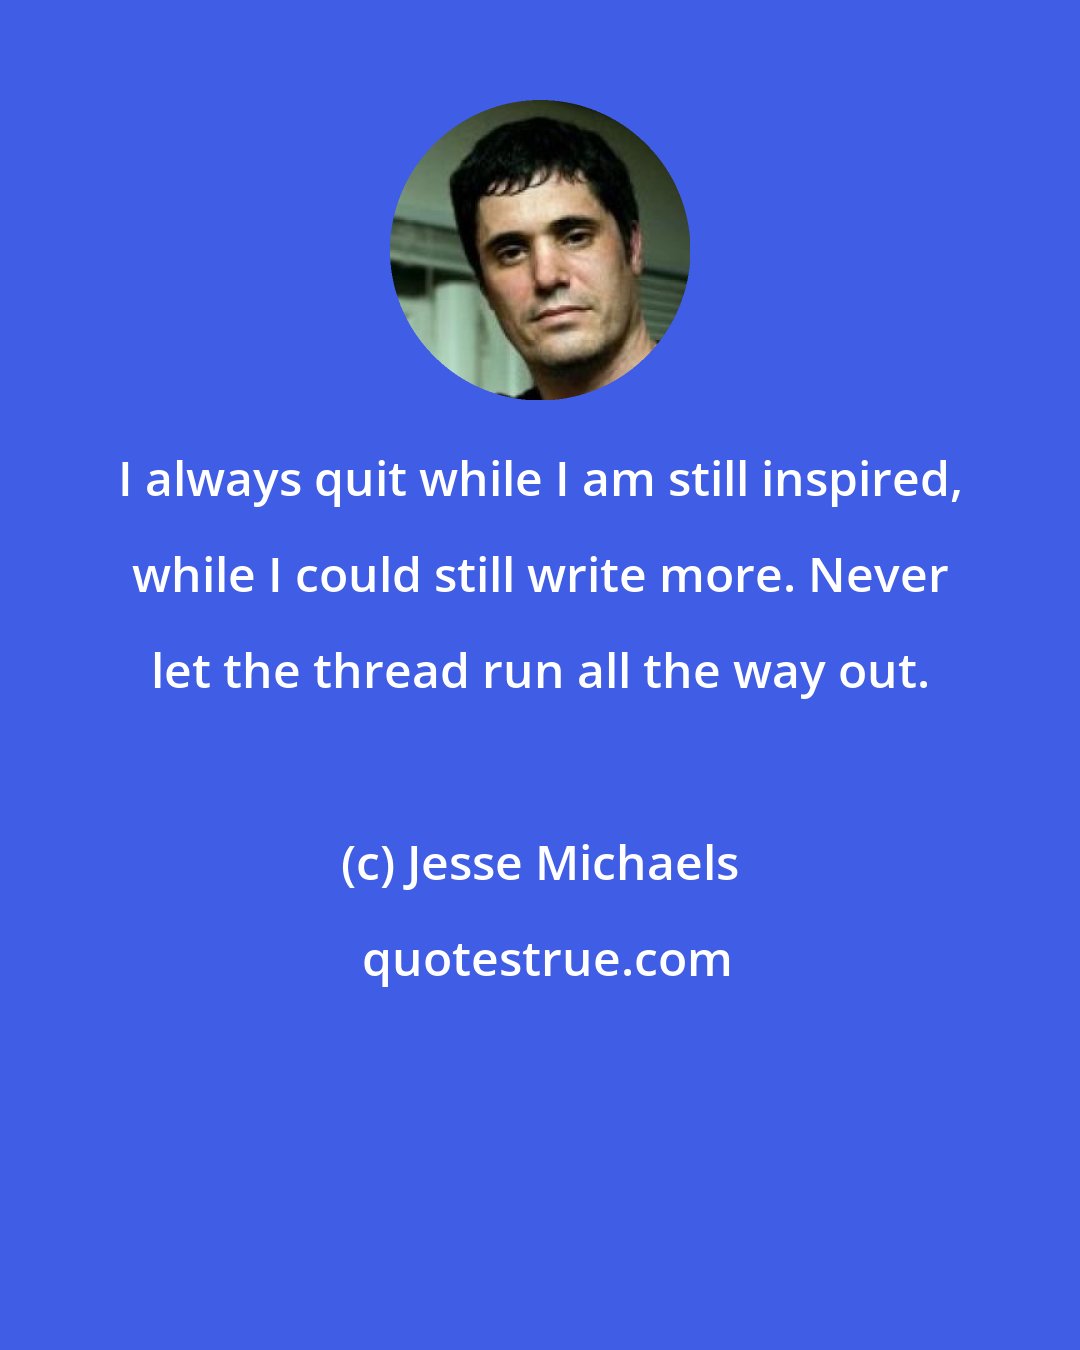 Jesse Michaels: I always quit while I am still inspired, while I could still write more. Never let the thread run all the way out.